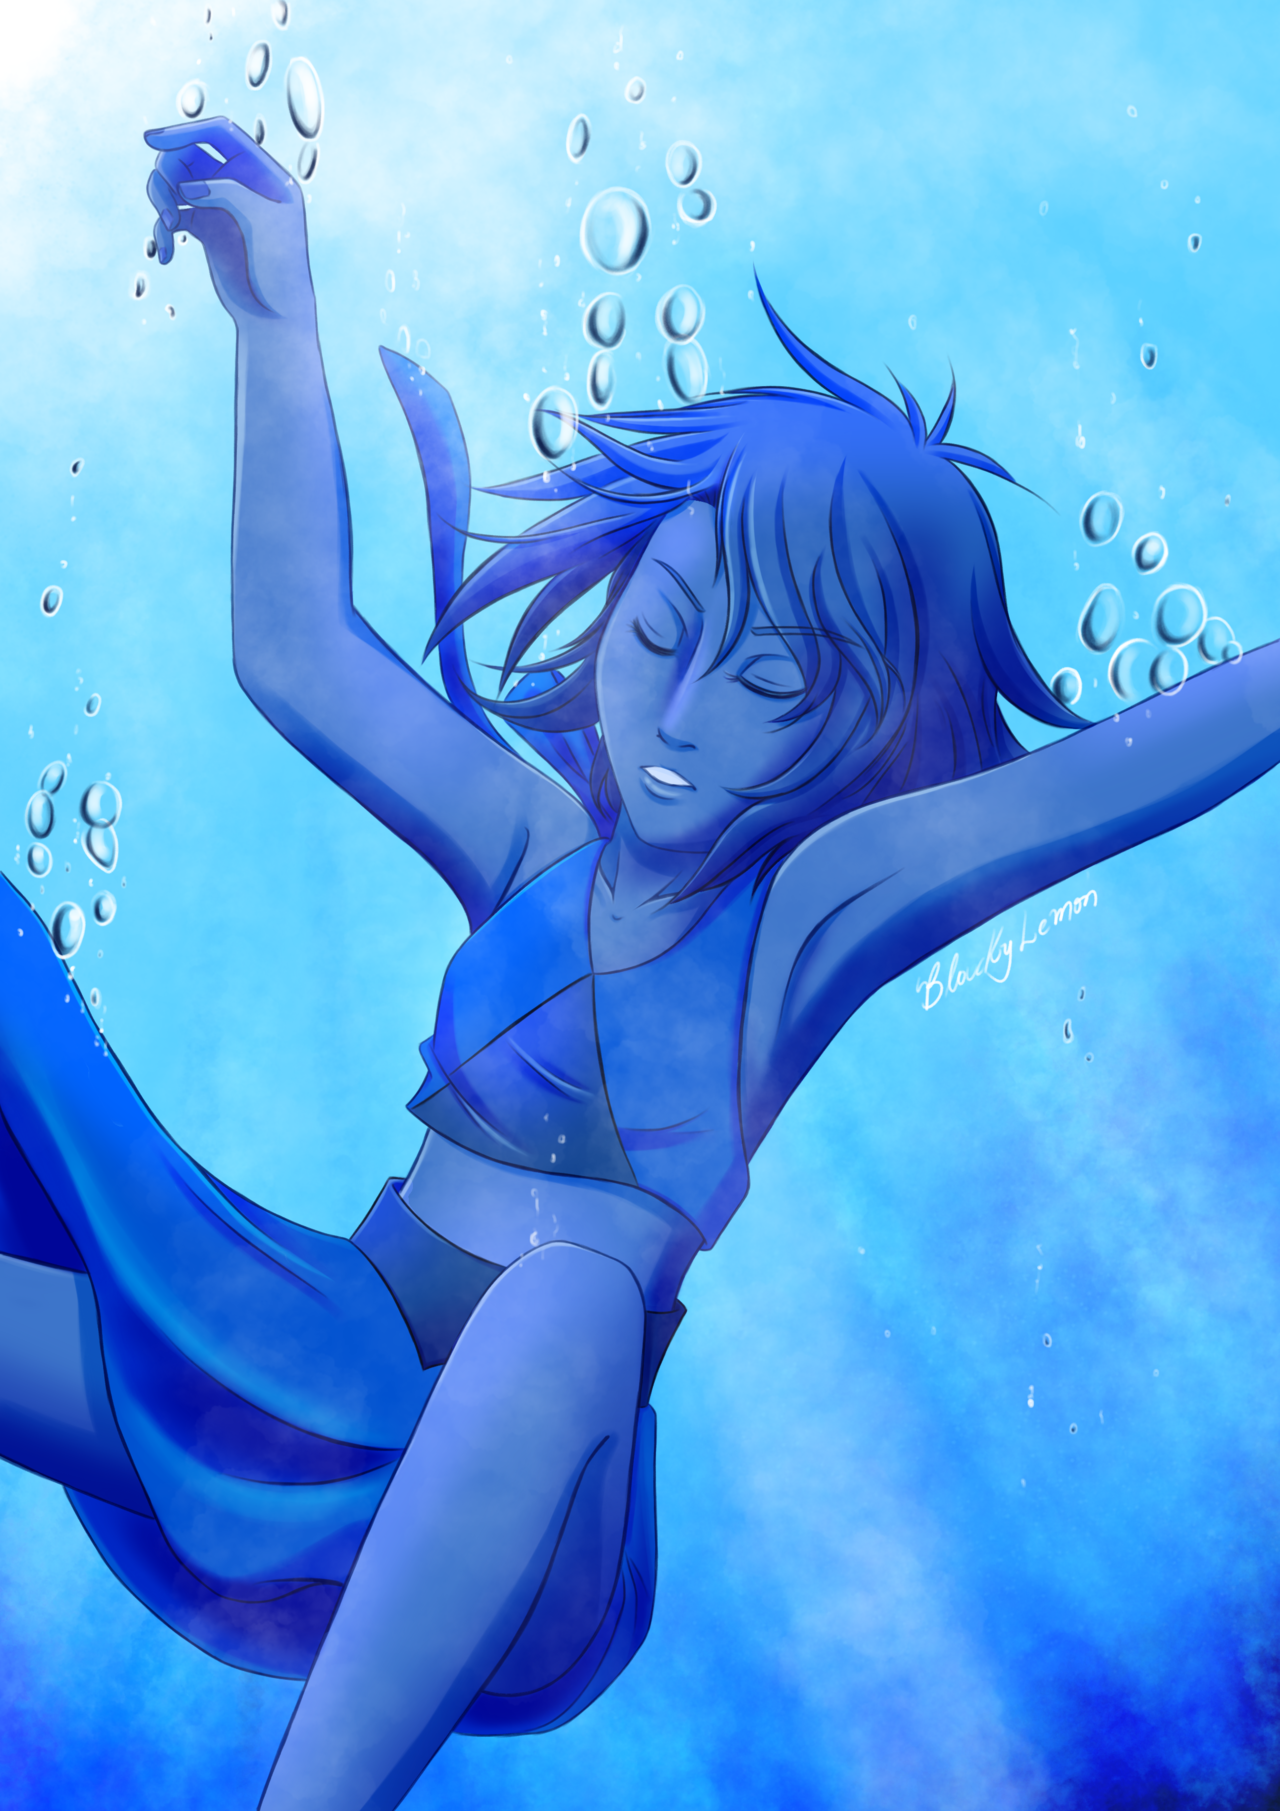 Lapis Lazuli, you fled into the bottom of the sea~

 Fighting procreate it’s not easy but we could work together~